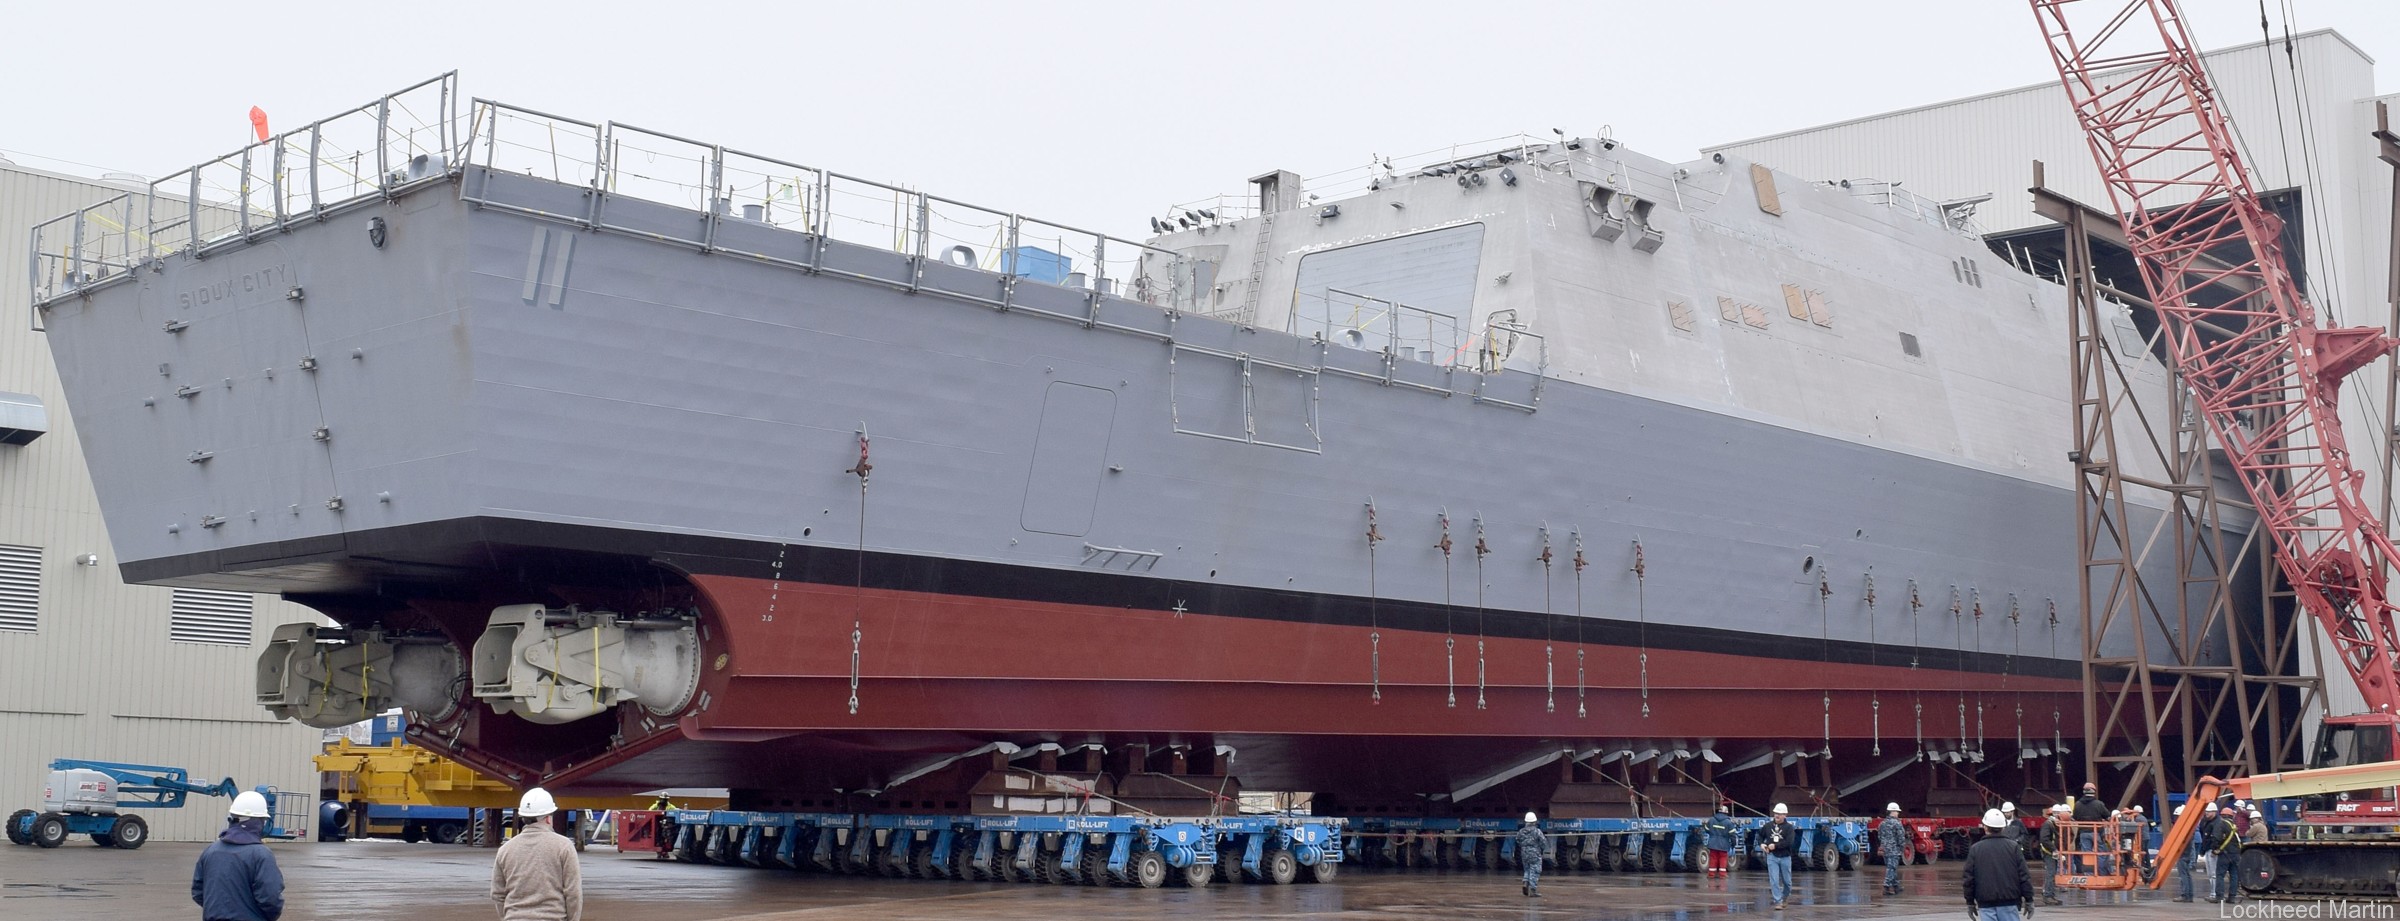 lcs-11 uss sioux city freedom class littoral combat ship us navy 48 roll out marinette marine lockheed martin